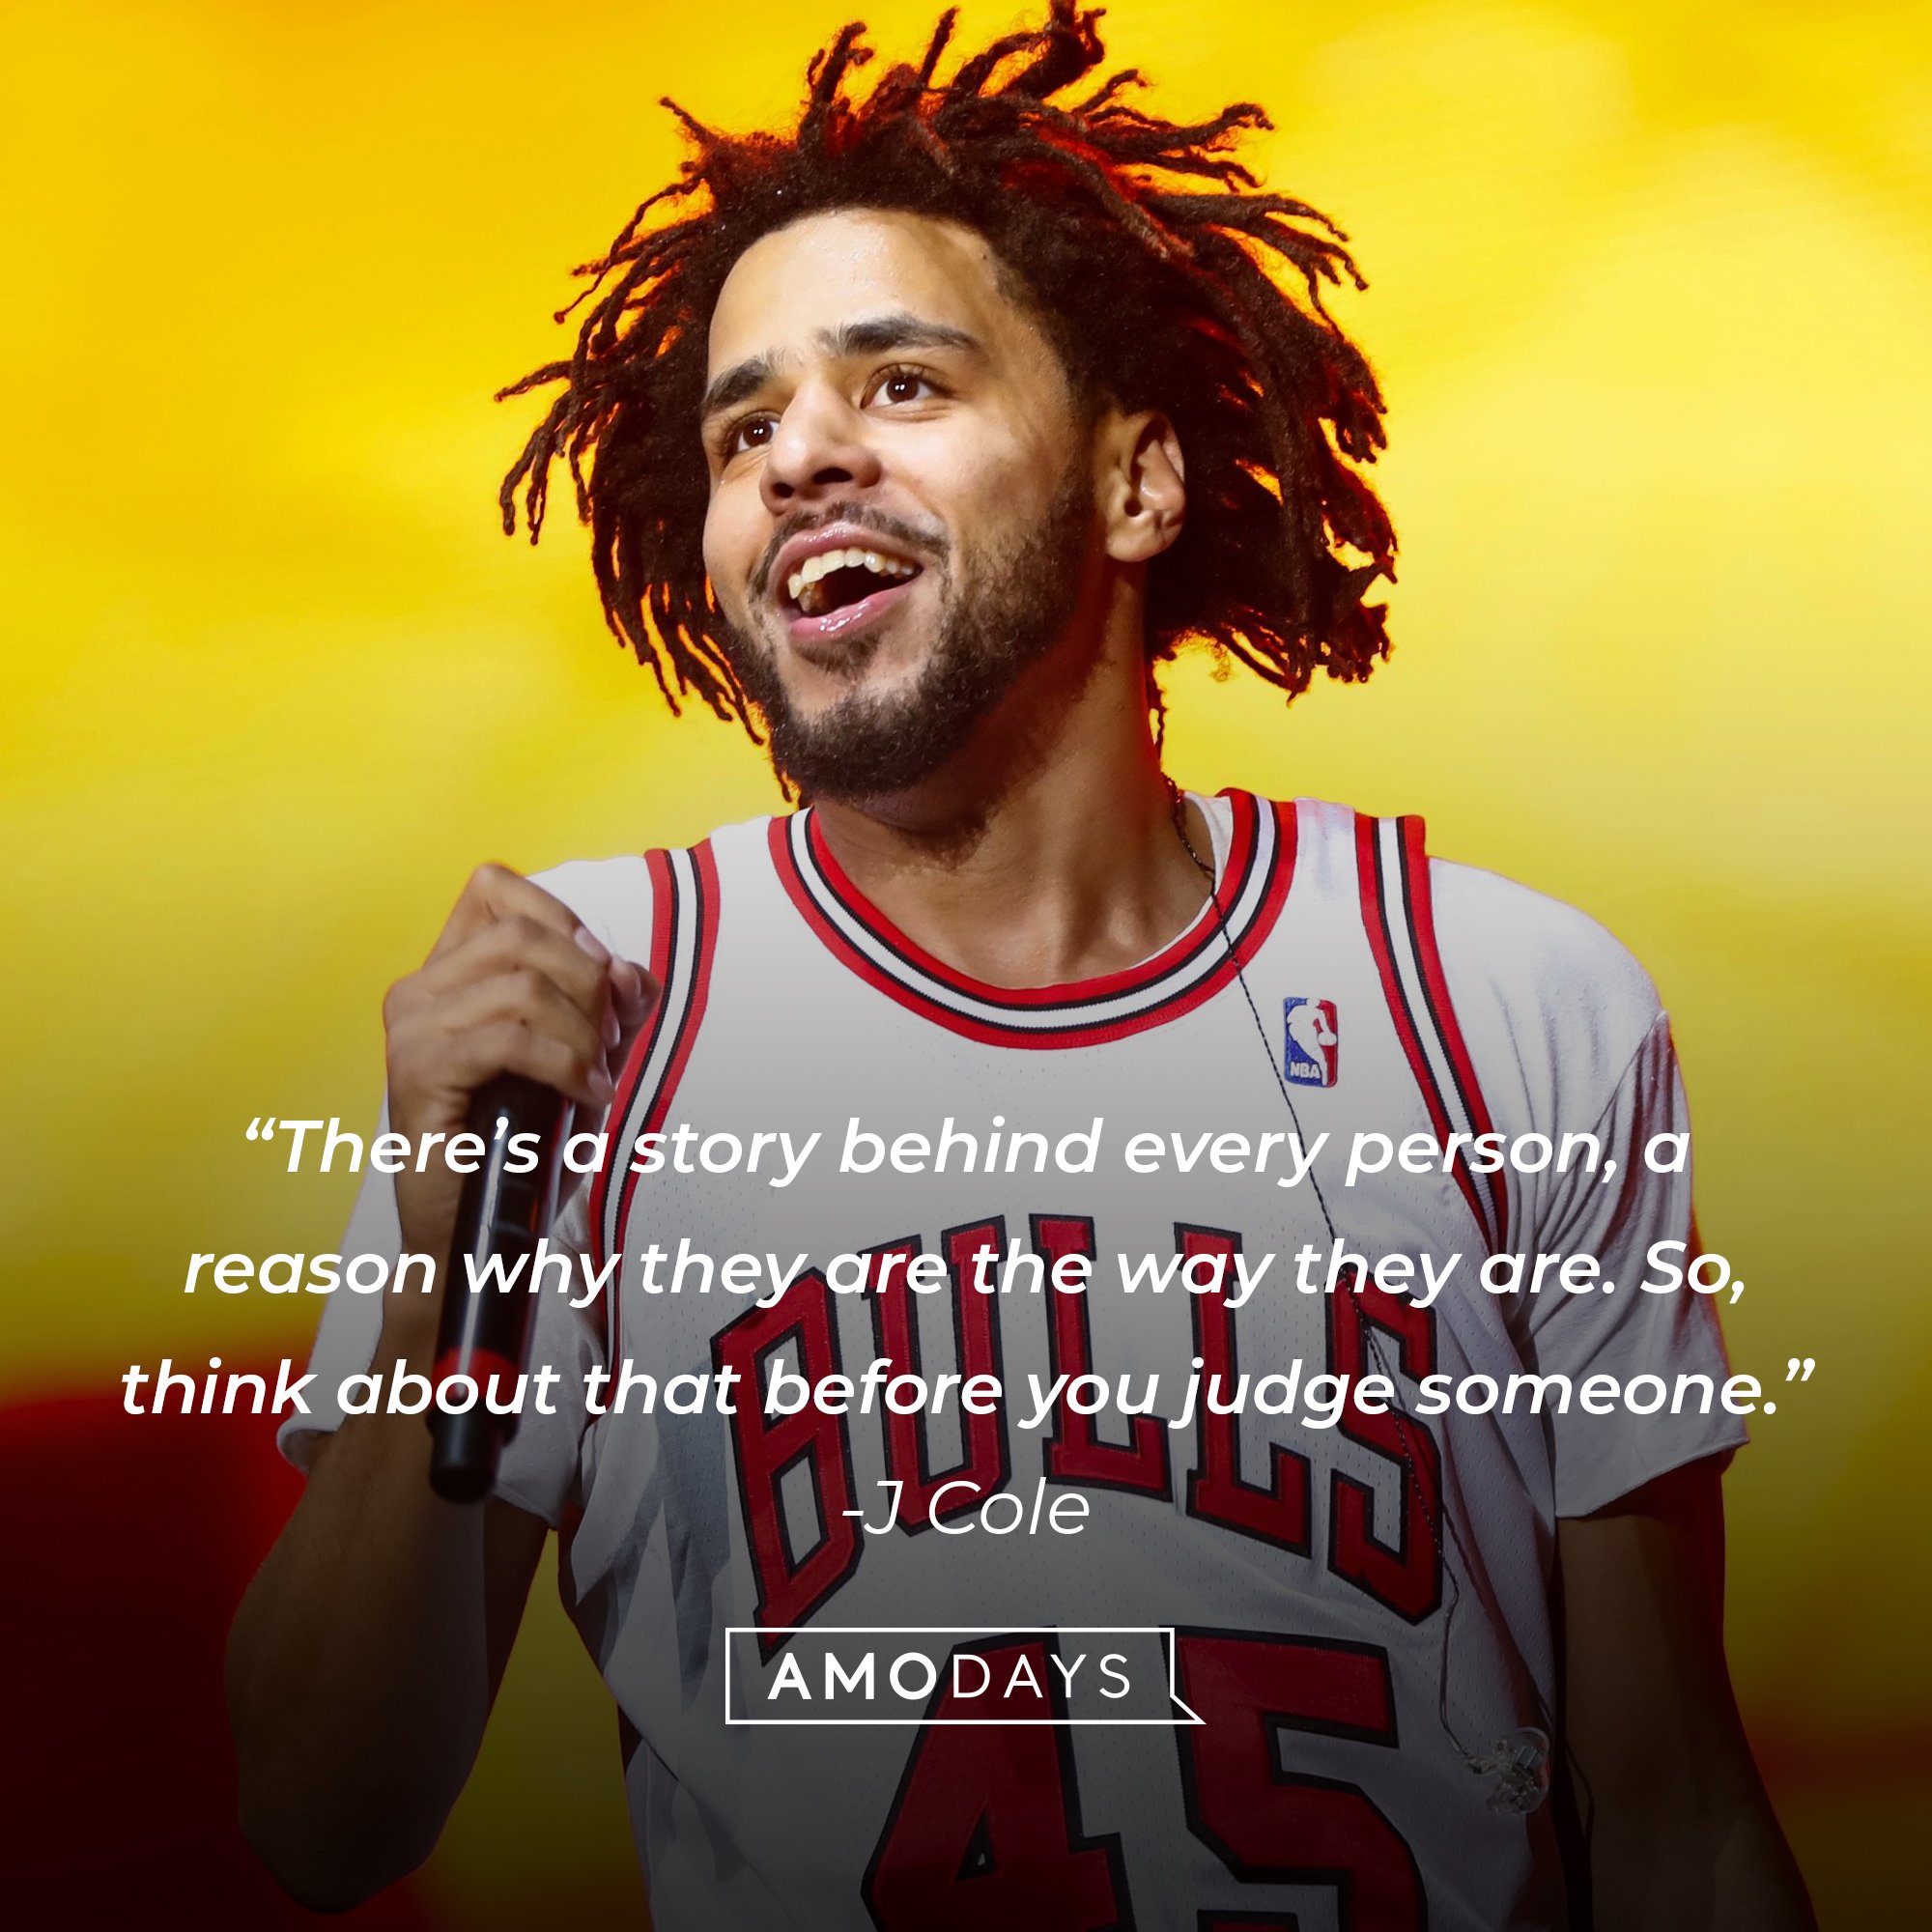 J Cole's quote: “There’s a story behind every person, a reason why they are the way they are. So, think about that before you judge someone.” | Image: AmoDays